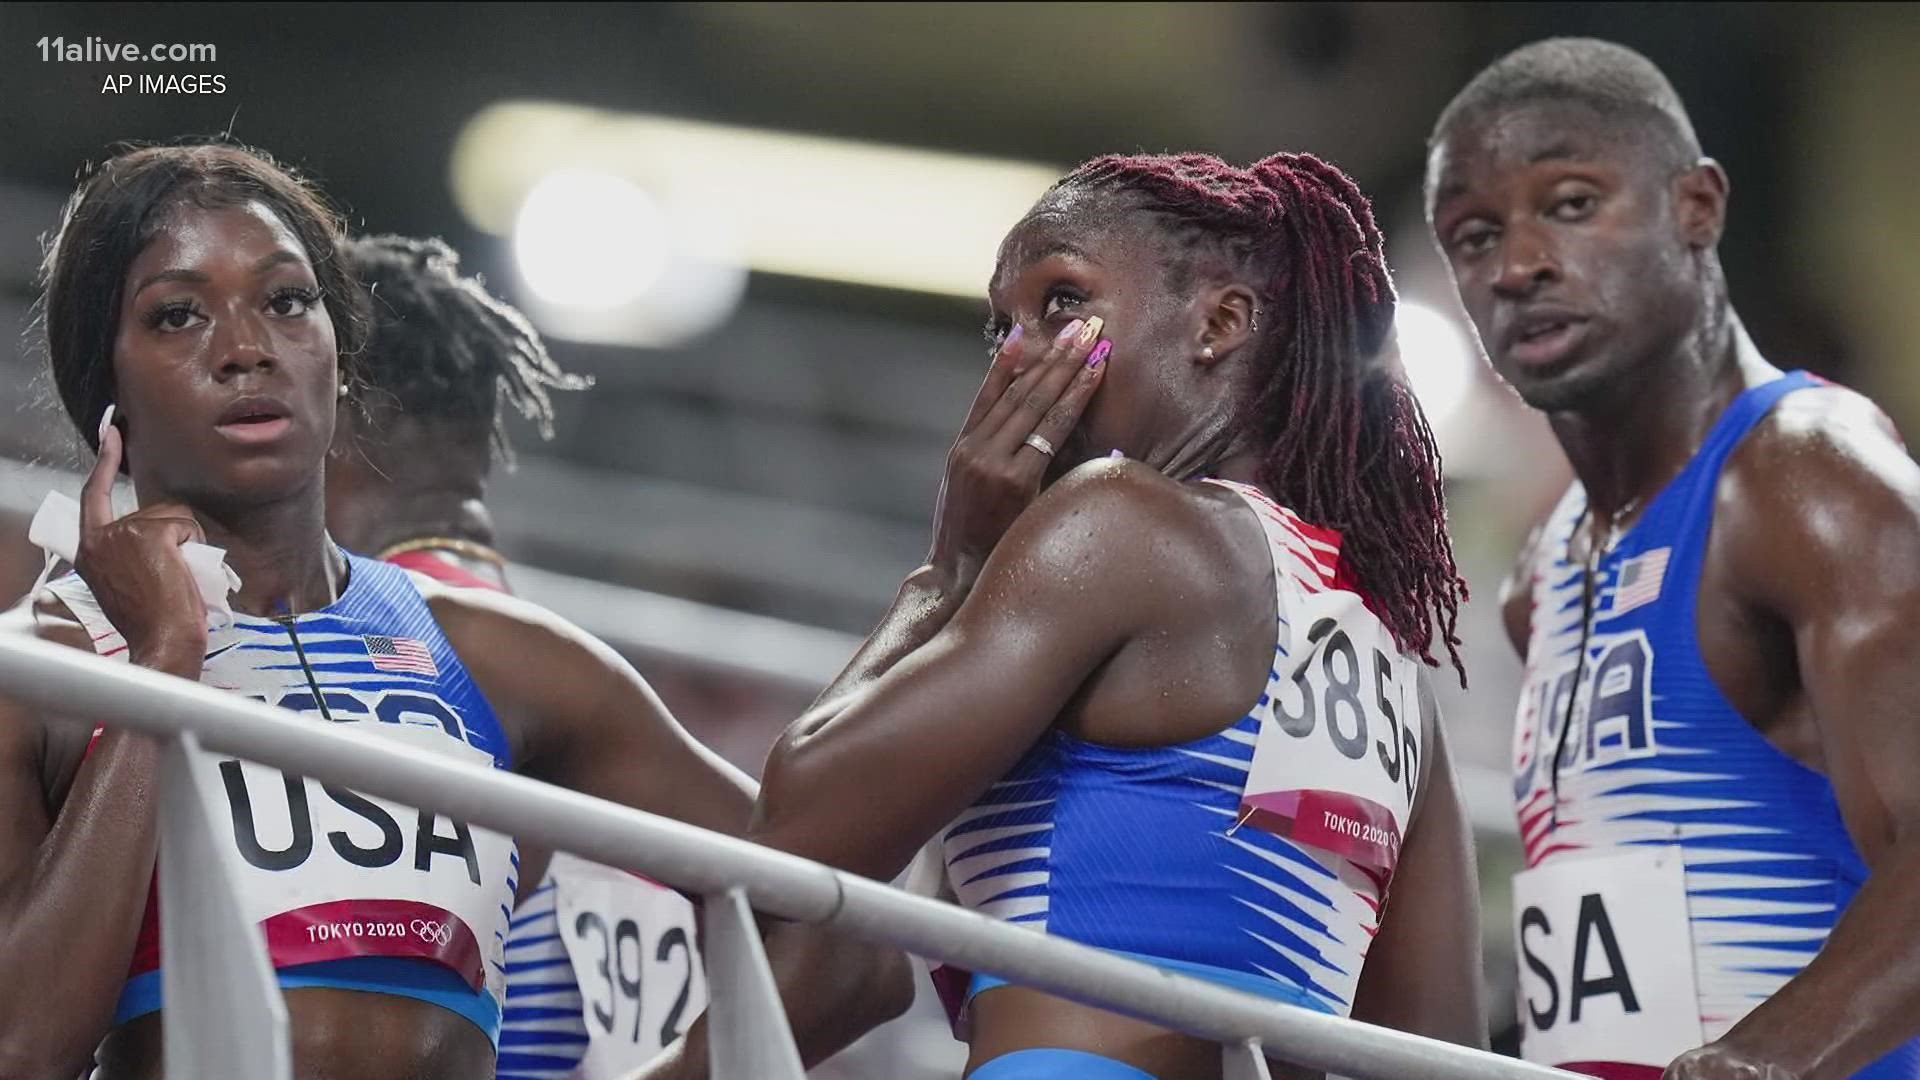 After being disqualified, the Team USA 4X400M mixed-gender medley team will race for the final.